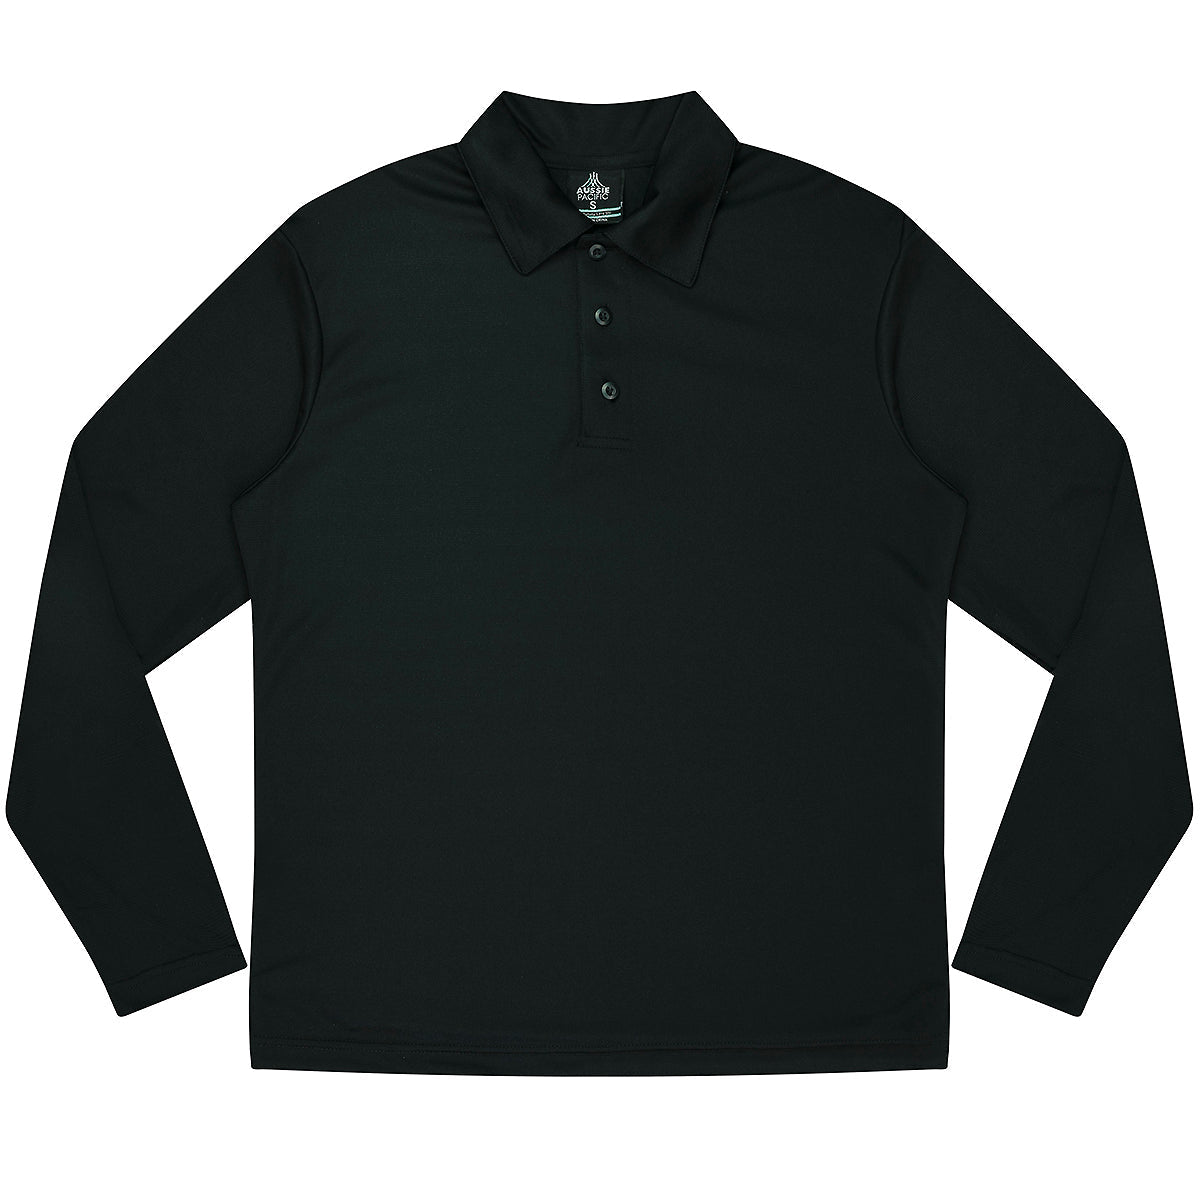 Aussie Pacific Botany Men's Long Sleeve Polo Shirt 1316 Casual Wear Aussie Pacific Black S 